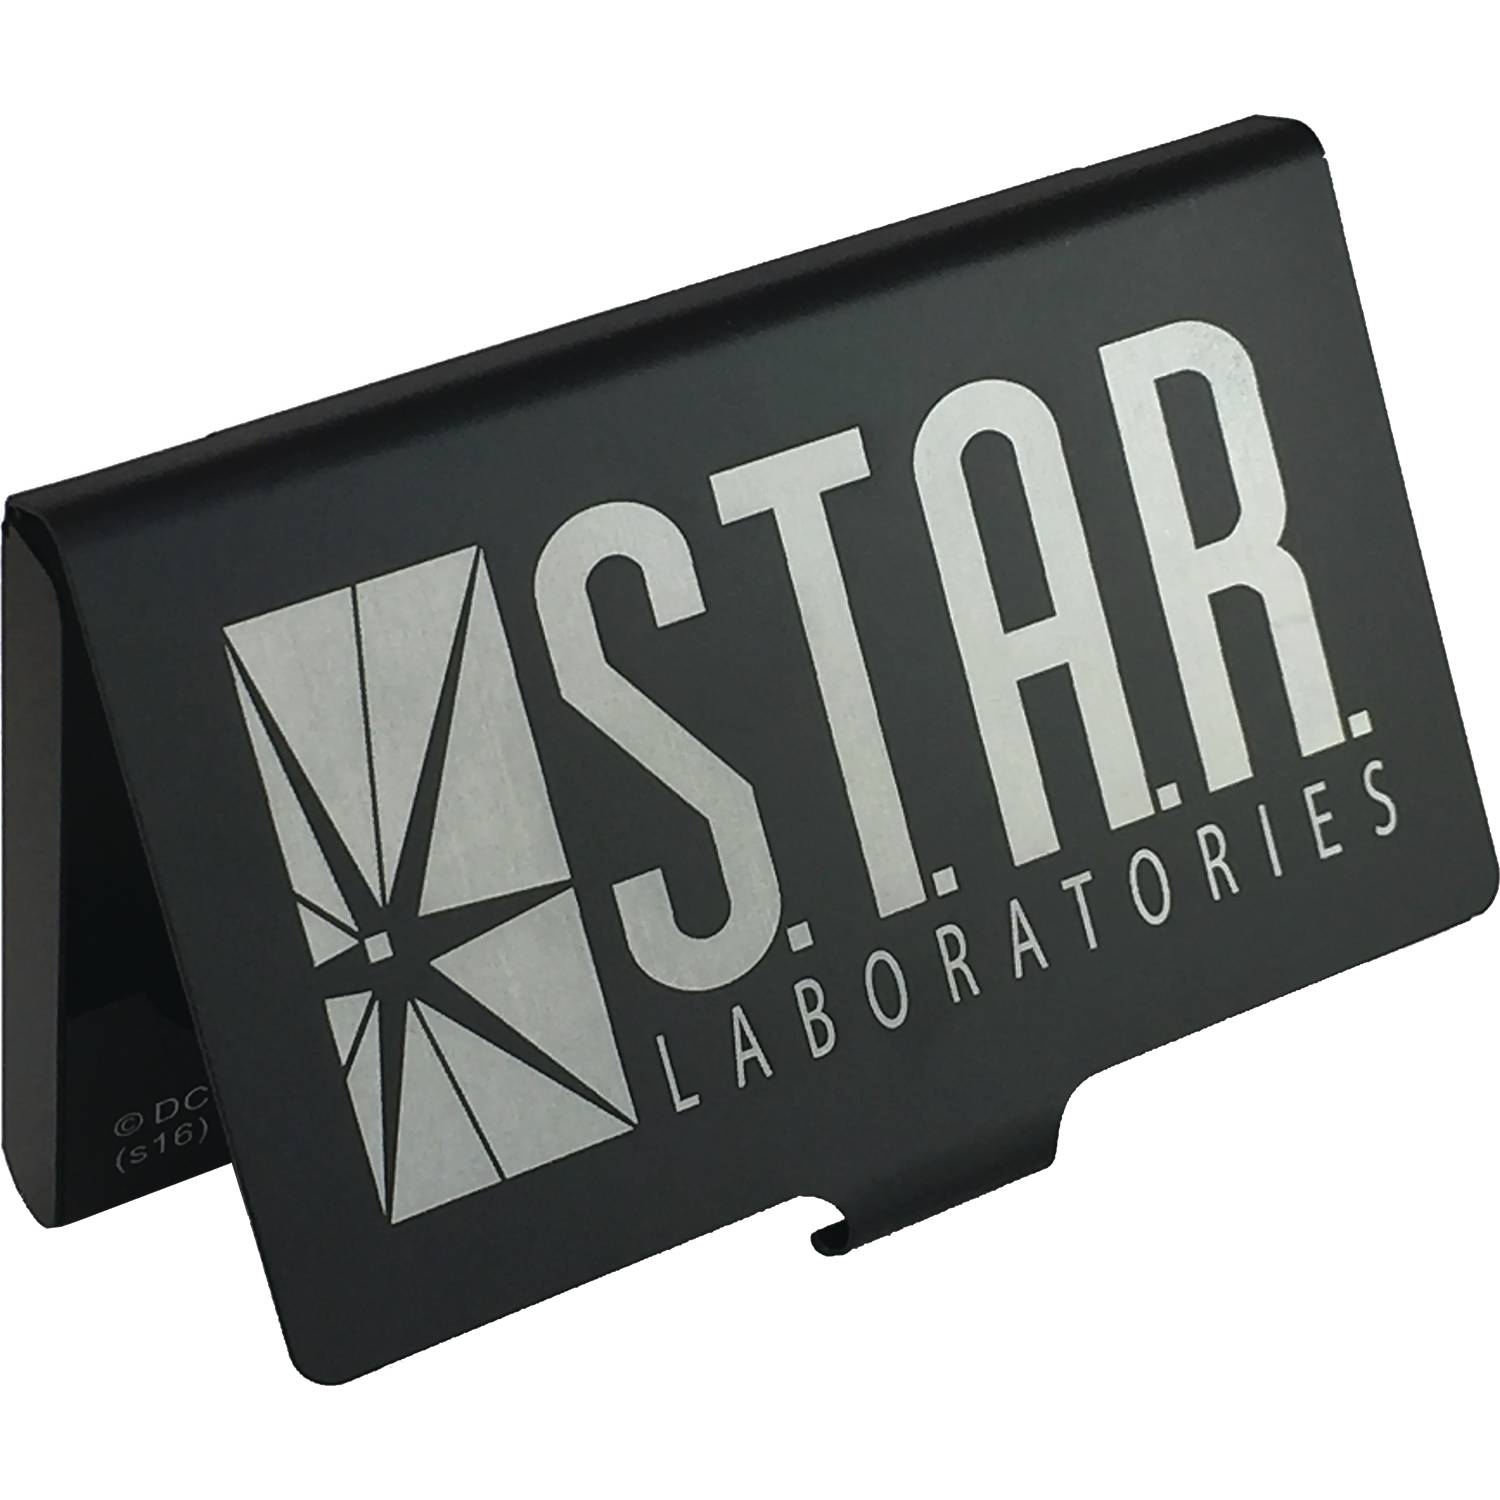 Flash TV Star Labs Business Card Case